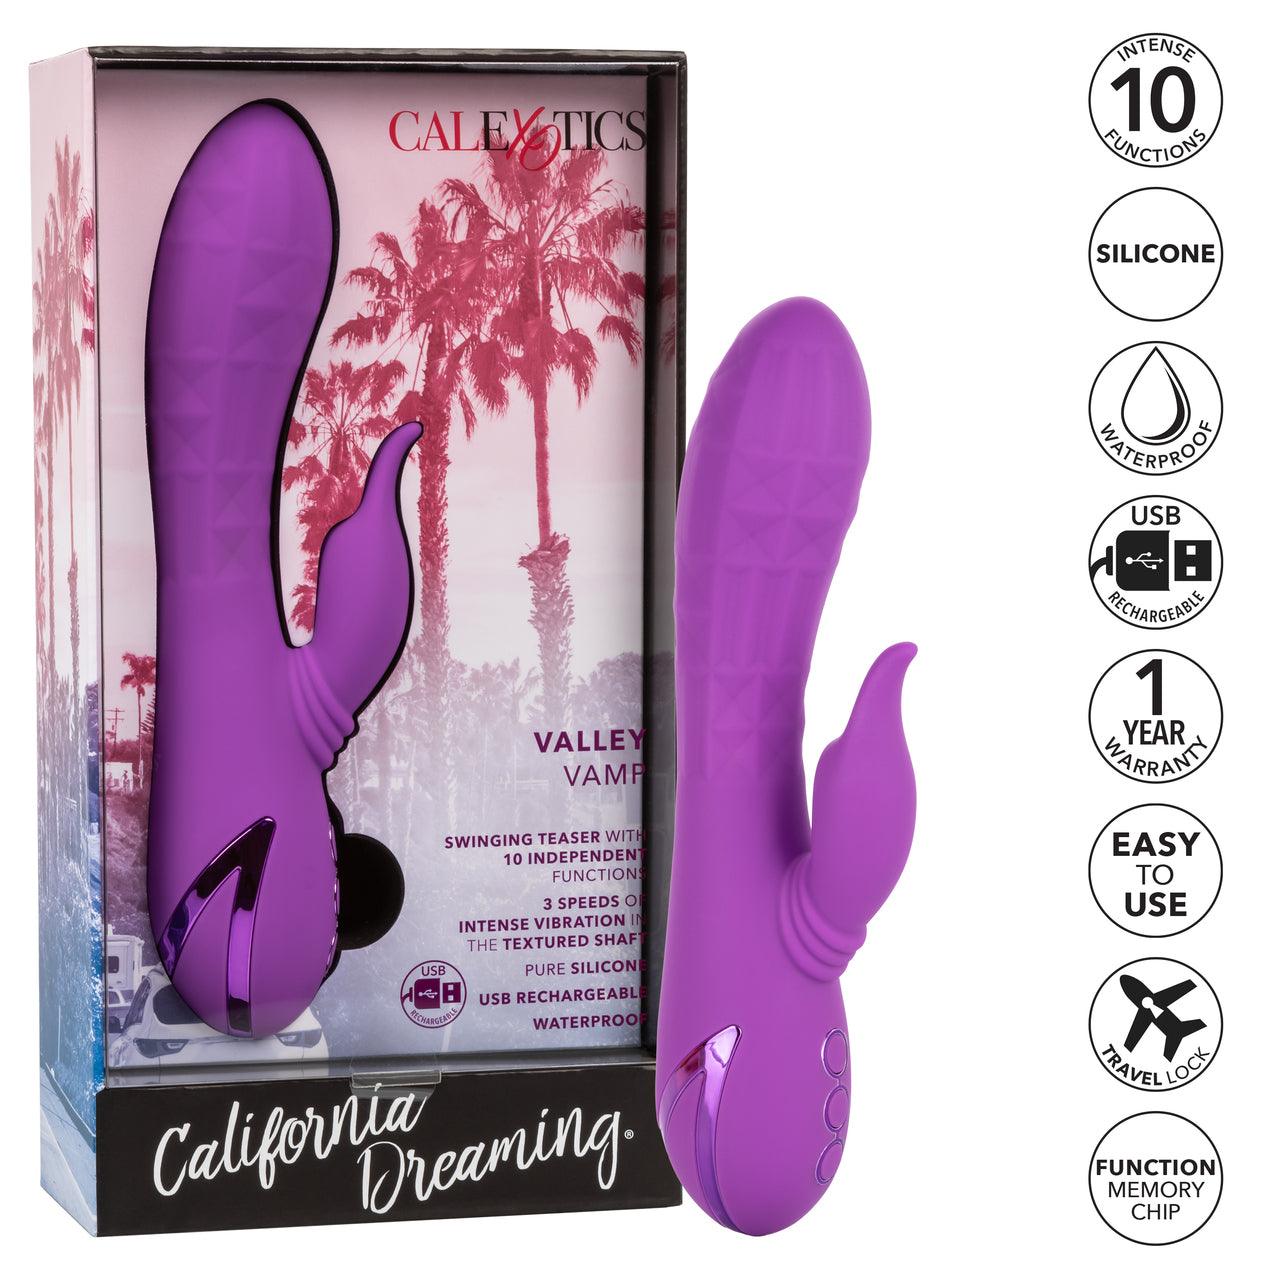 Calexotics California Dreaming West Coast Wave Rider - Buy At Luxury Toy X - Free 3-Day Shipping